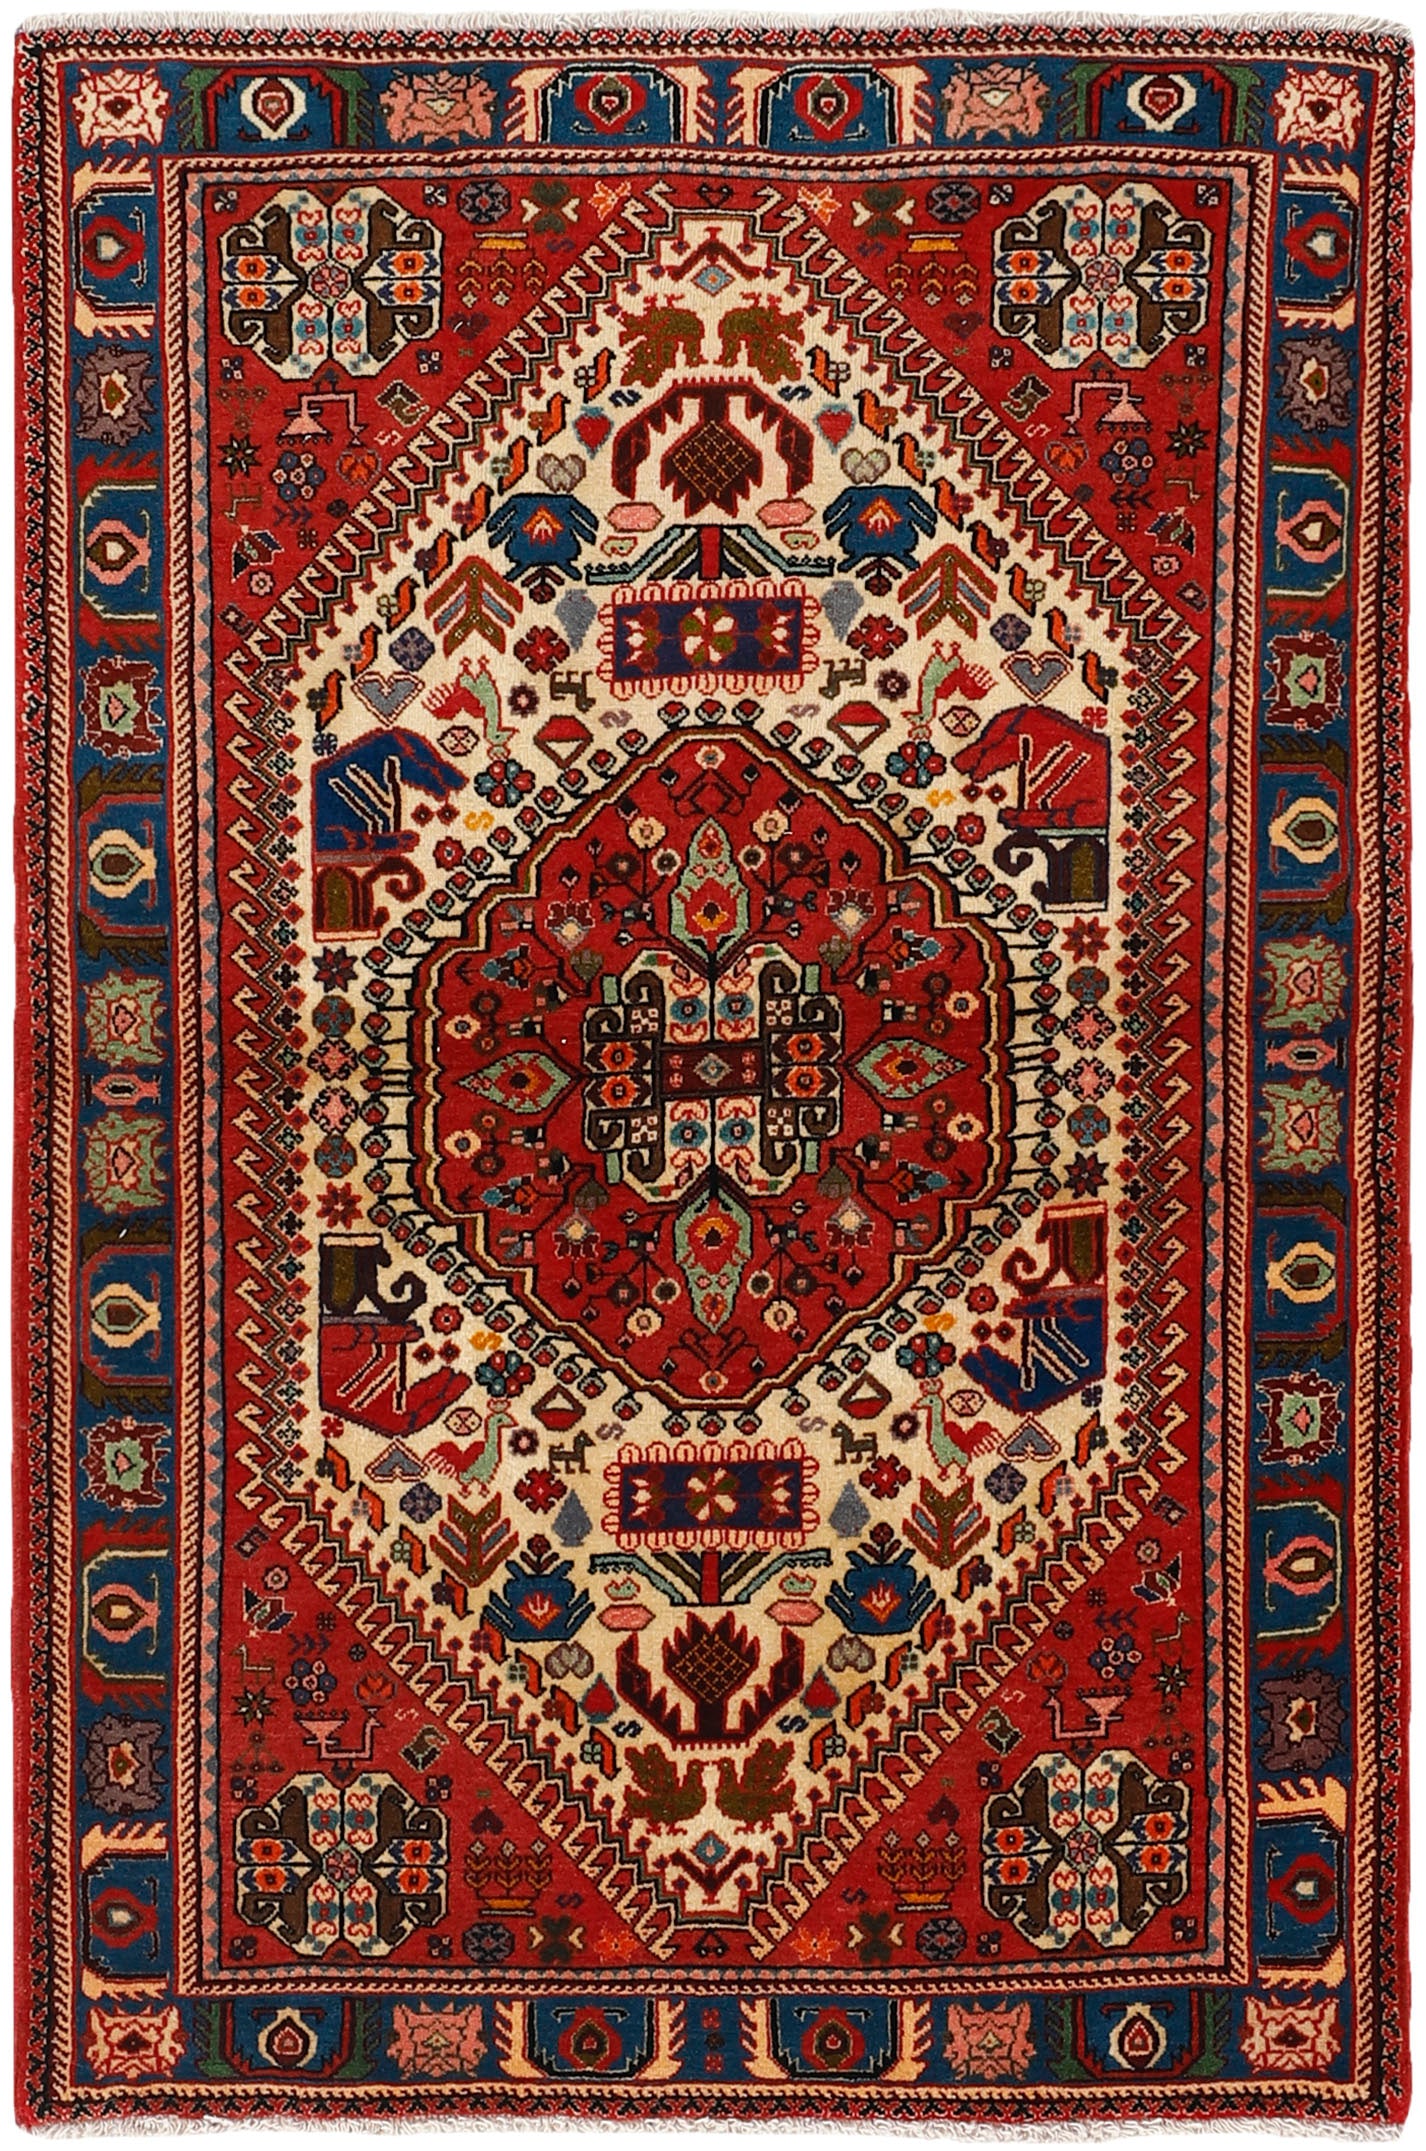 Authentic persian rug with traditional tribal geometric design in red and cream